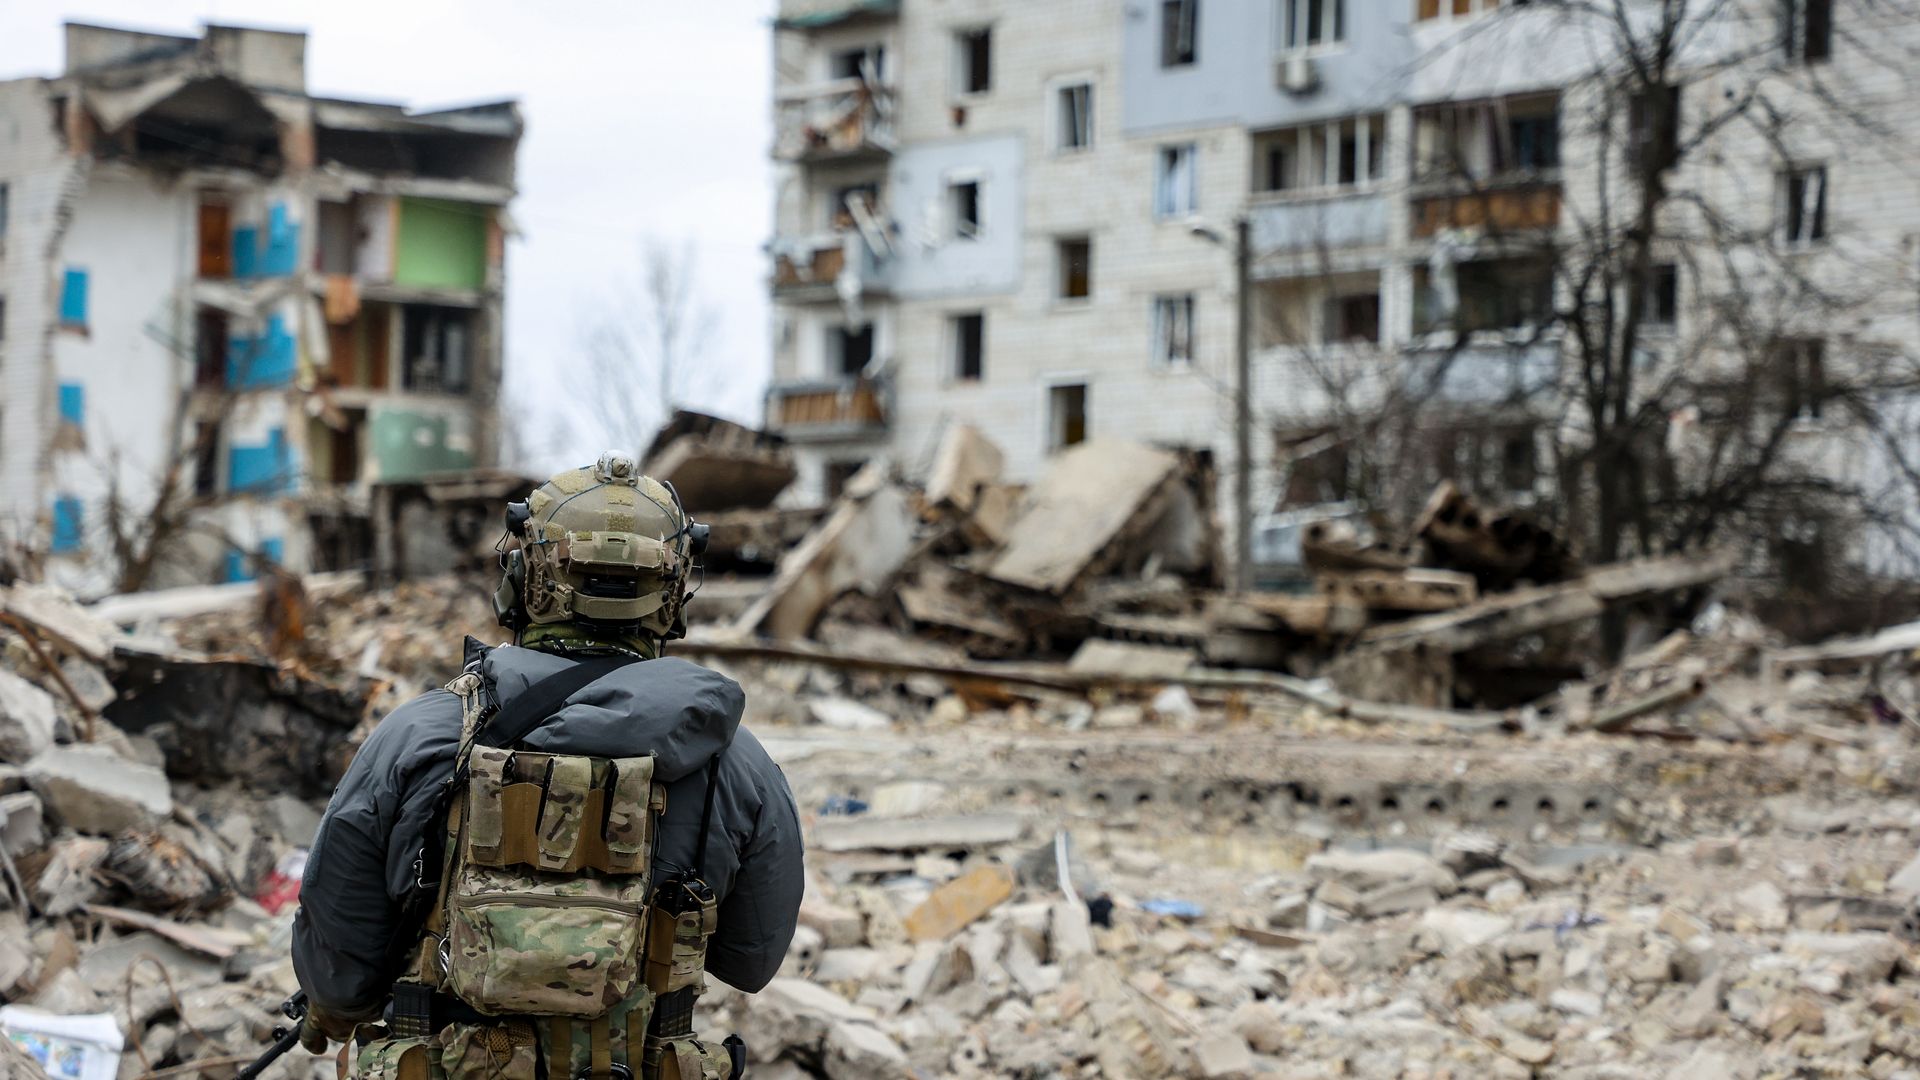 A military man looks at the ruins of buildings destroyed by Russian shelling, amid Russia's Invasion of Ukraine, in Borodyanka, Kyiv region, Ukraine, April 13.